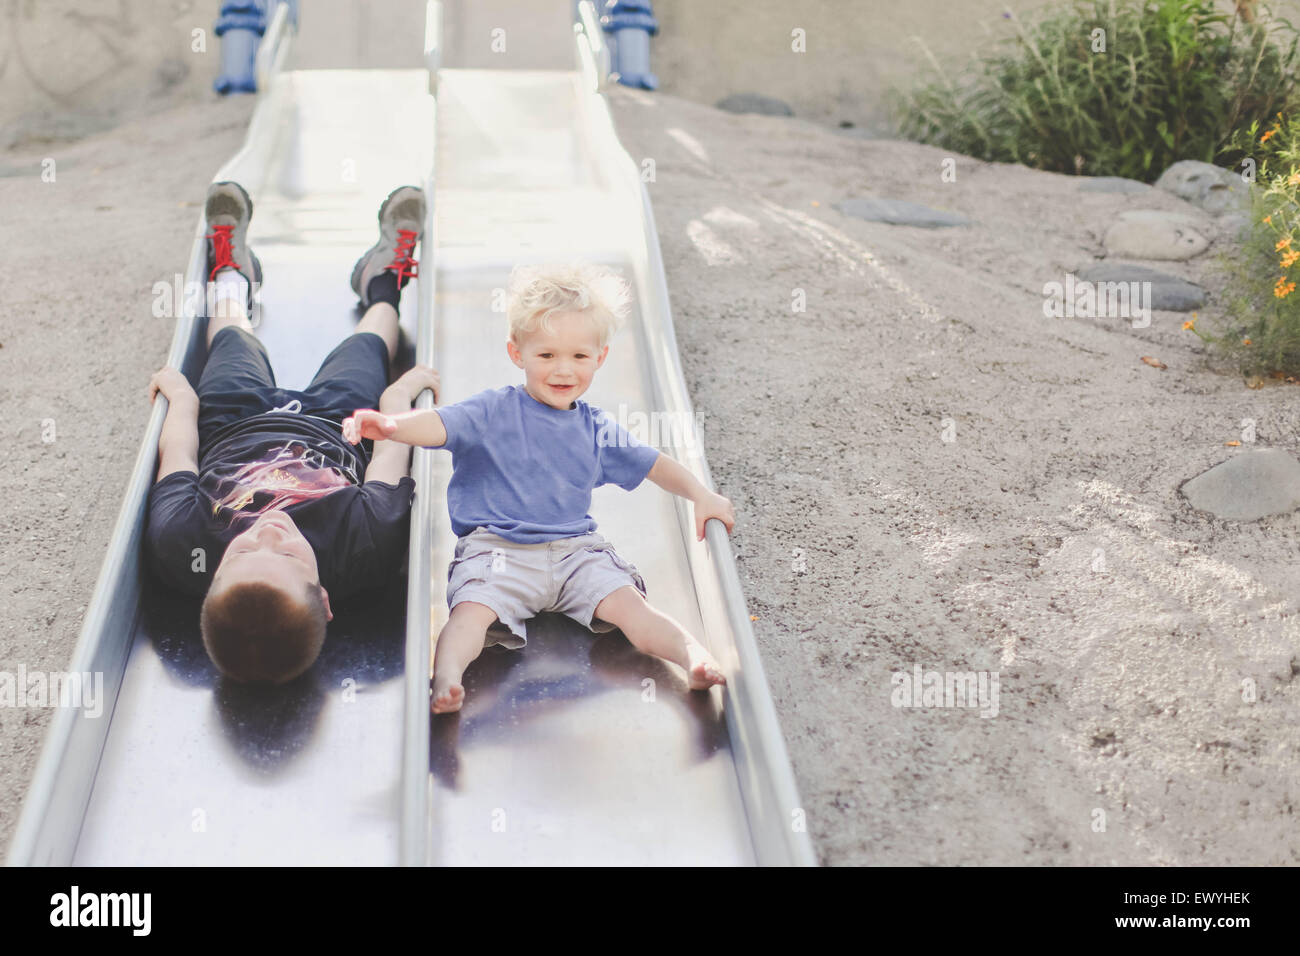 Two boys playing on  a slide at playground Stock Photo